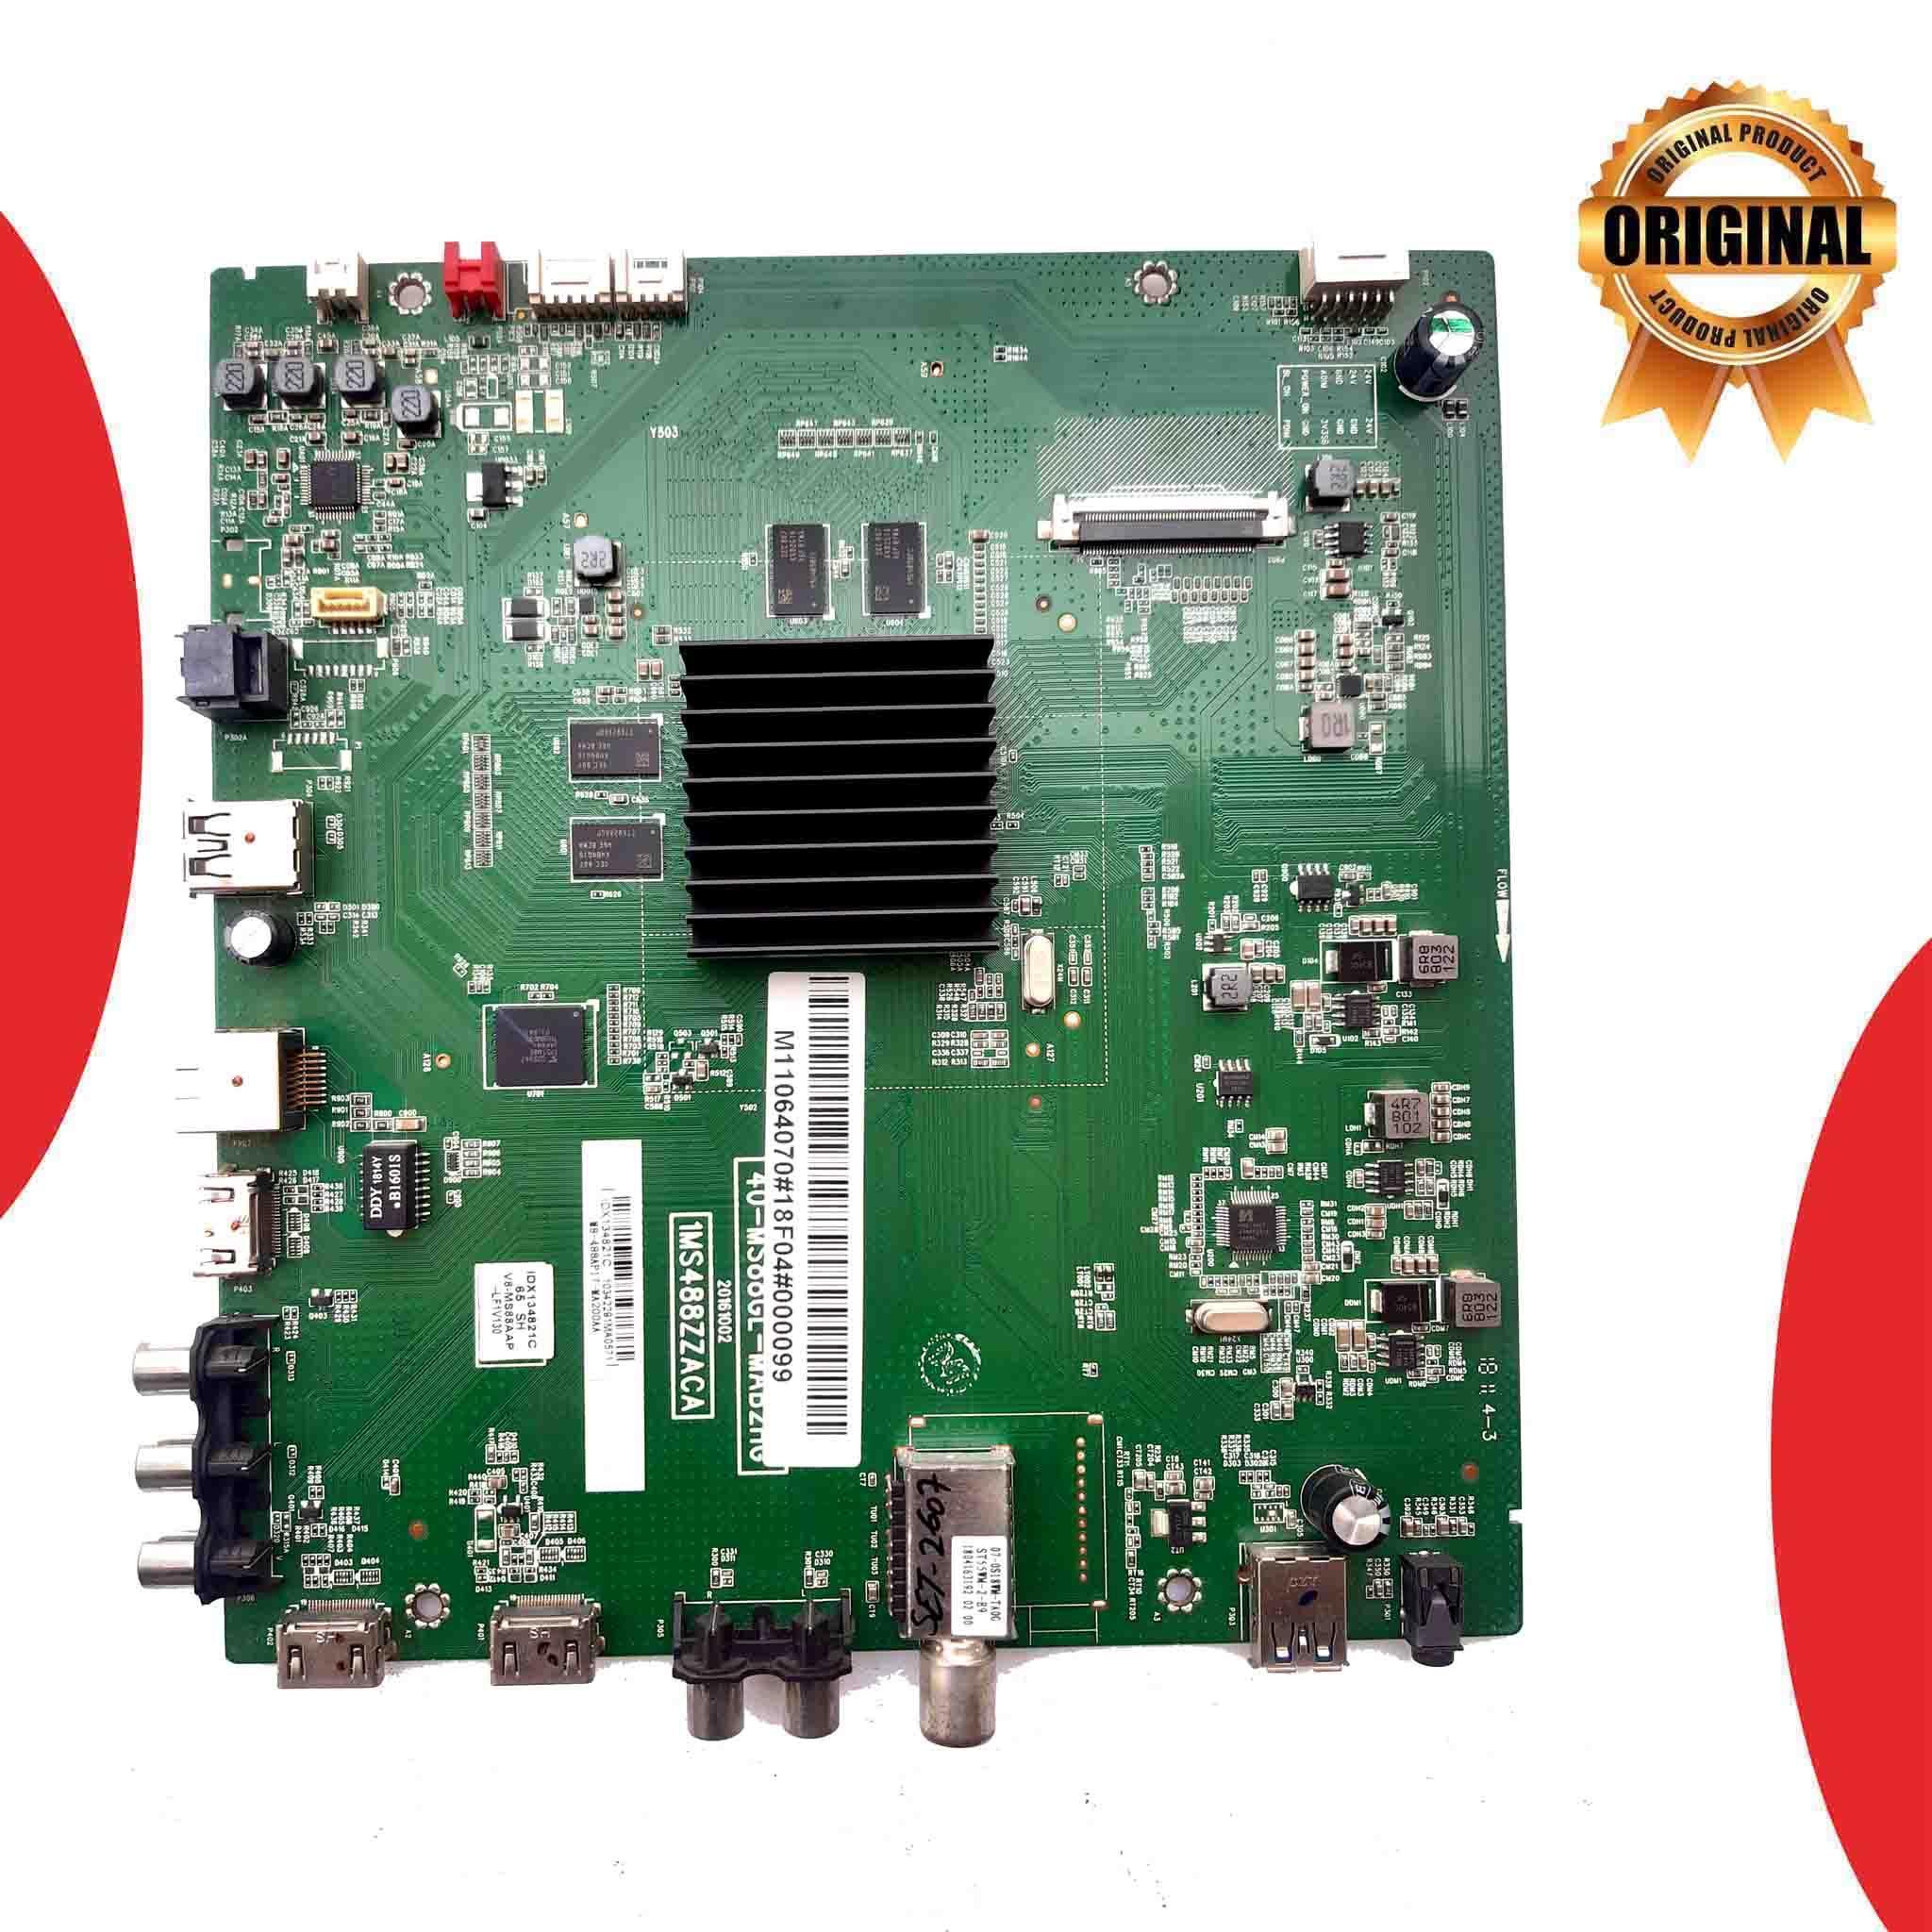 Reconnect 65 inch LED TV Motherboard for Model 65U6580S - Great Bharat Electronics